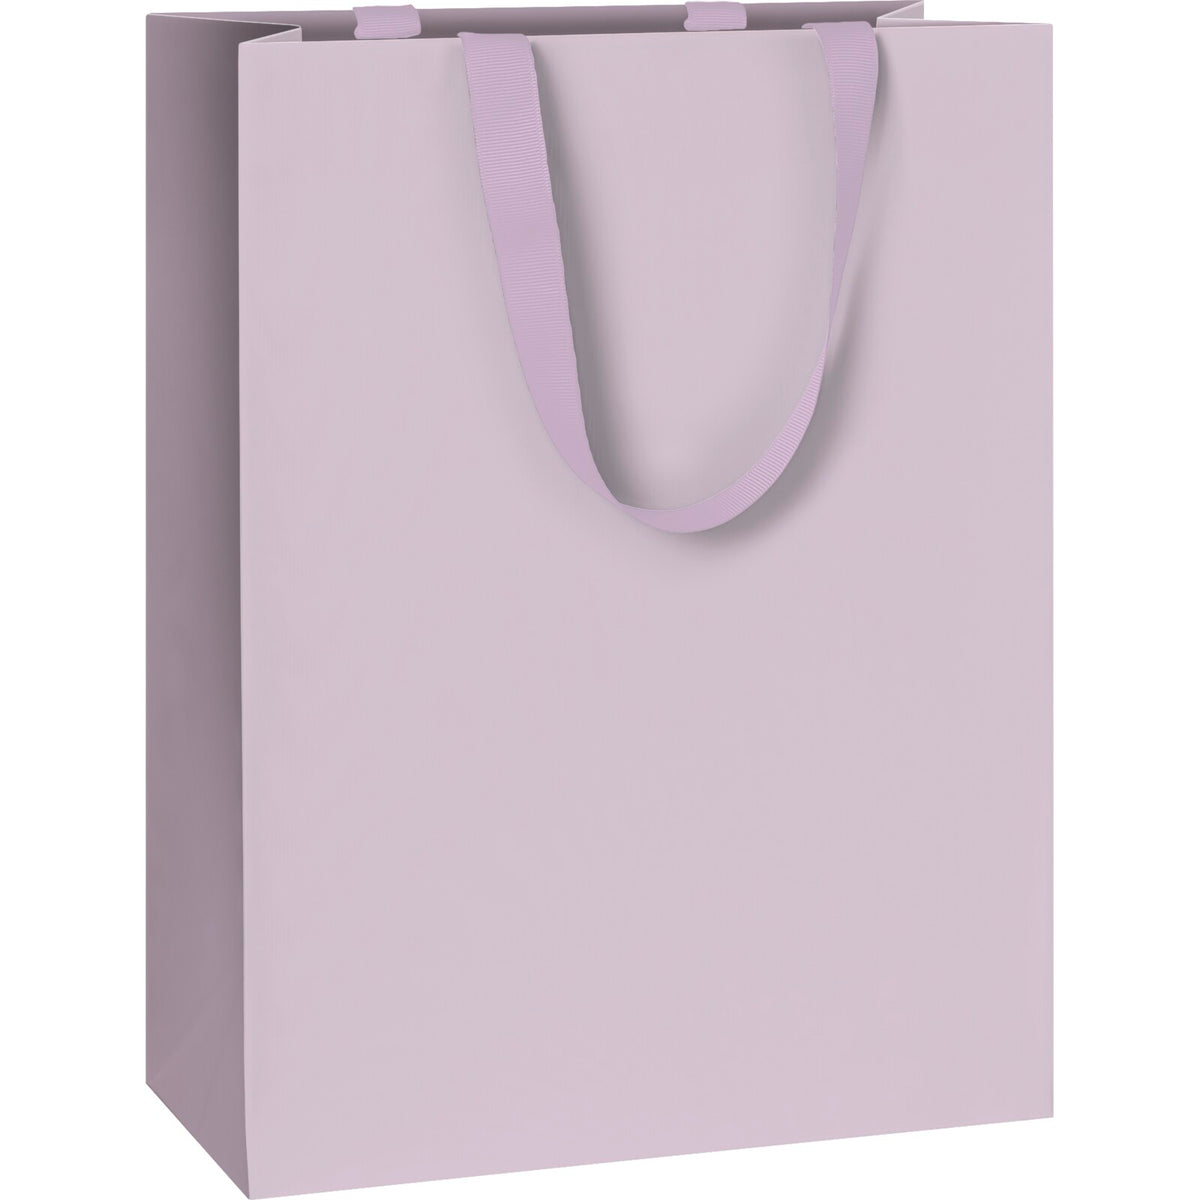 Misty Lilac Large Gift Bag by penny black